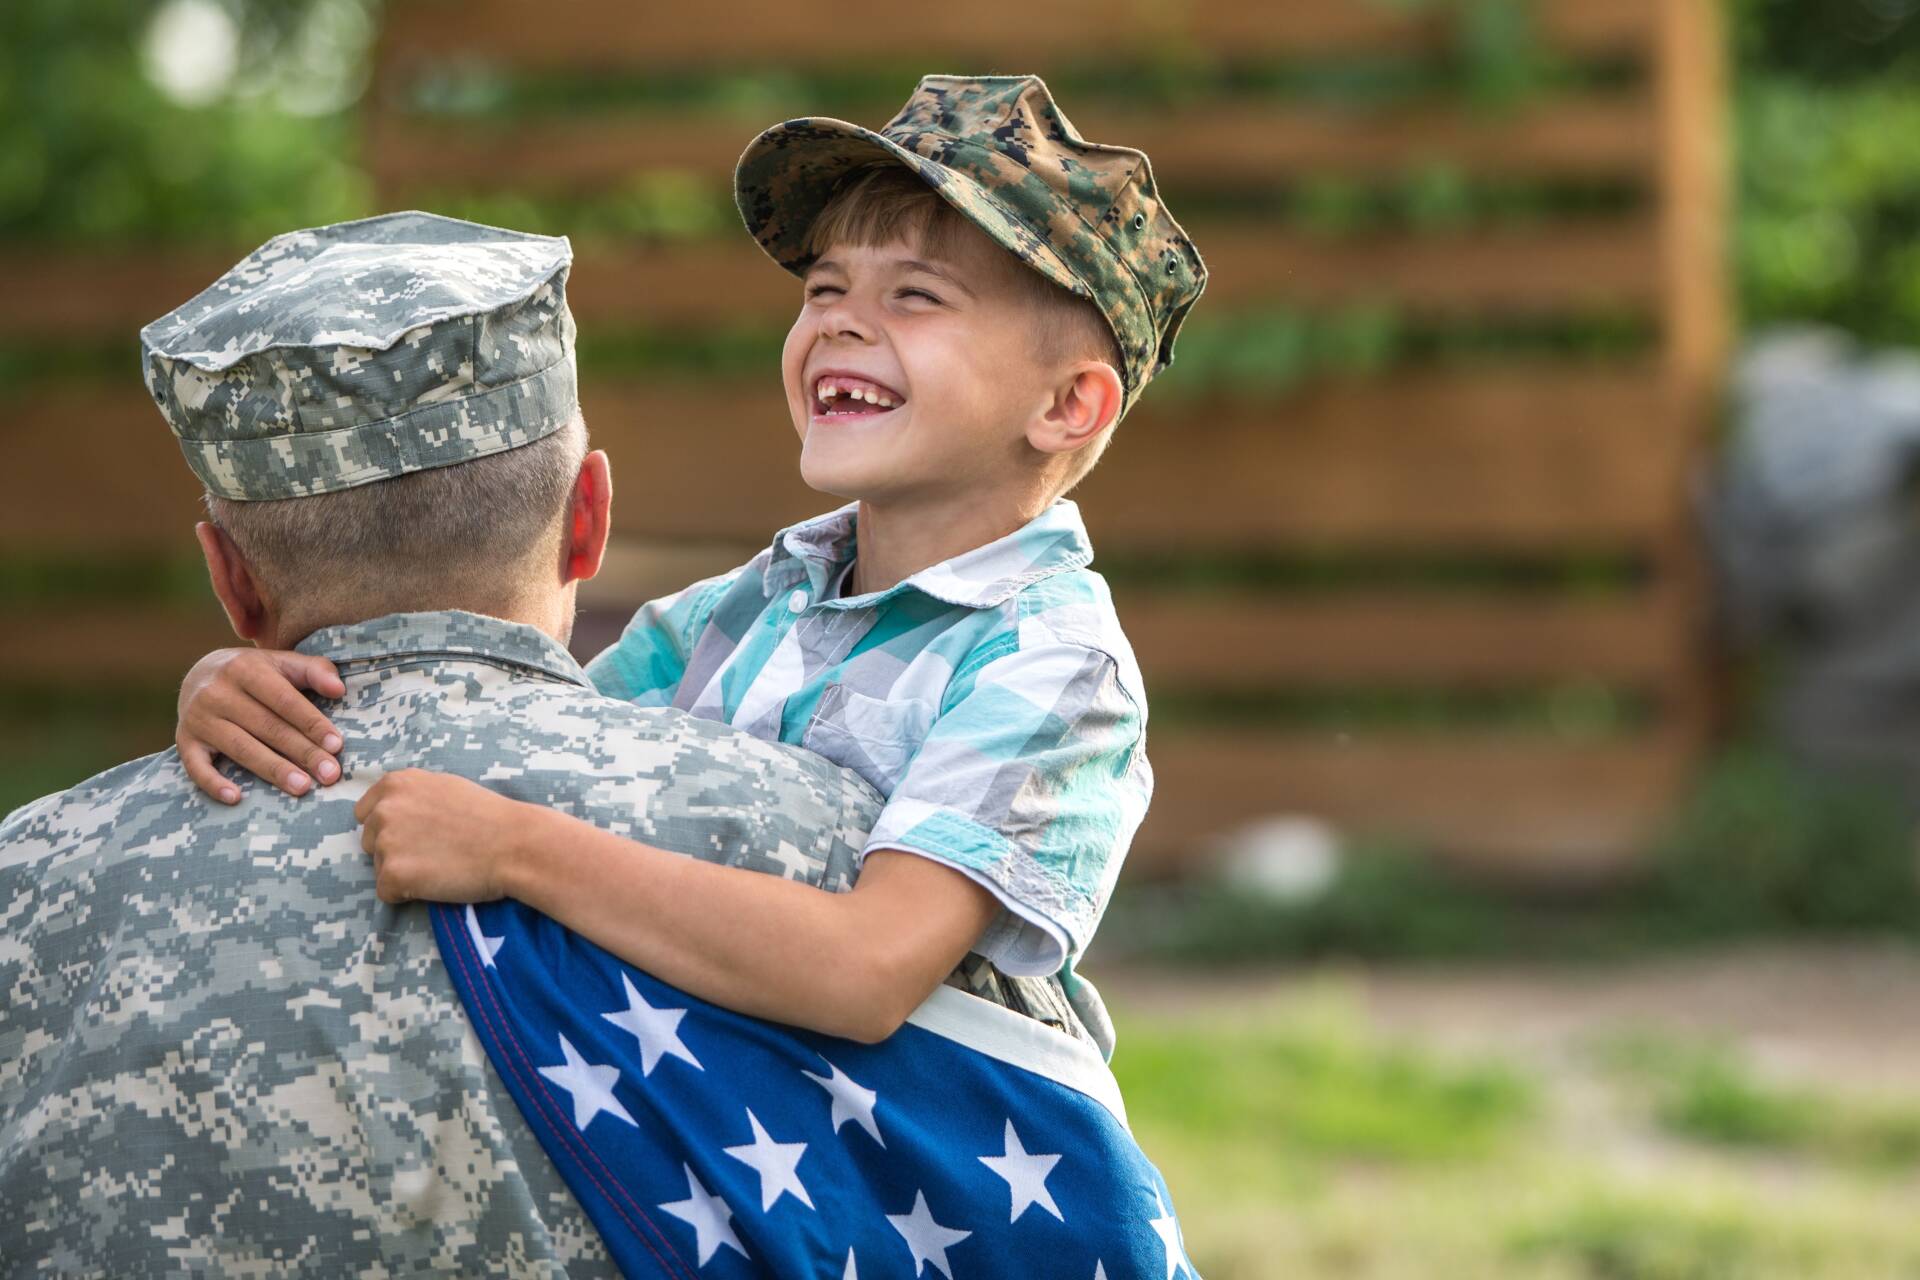 Son hugging military dad in uniform while carrying American flag